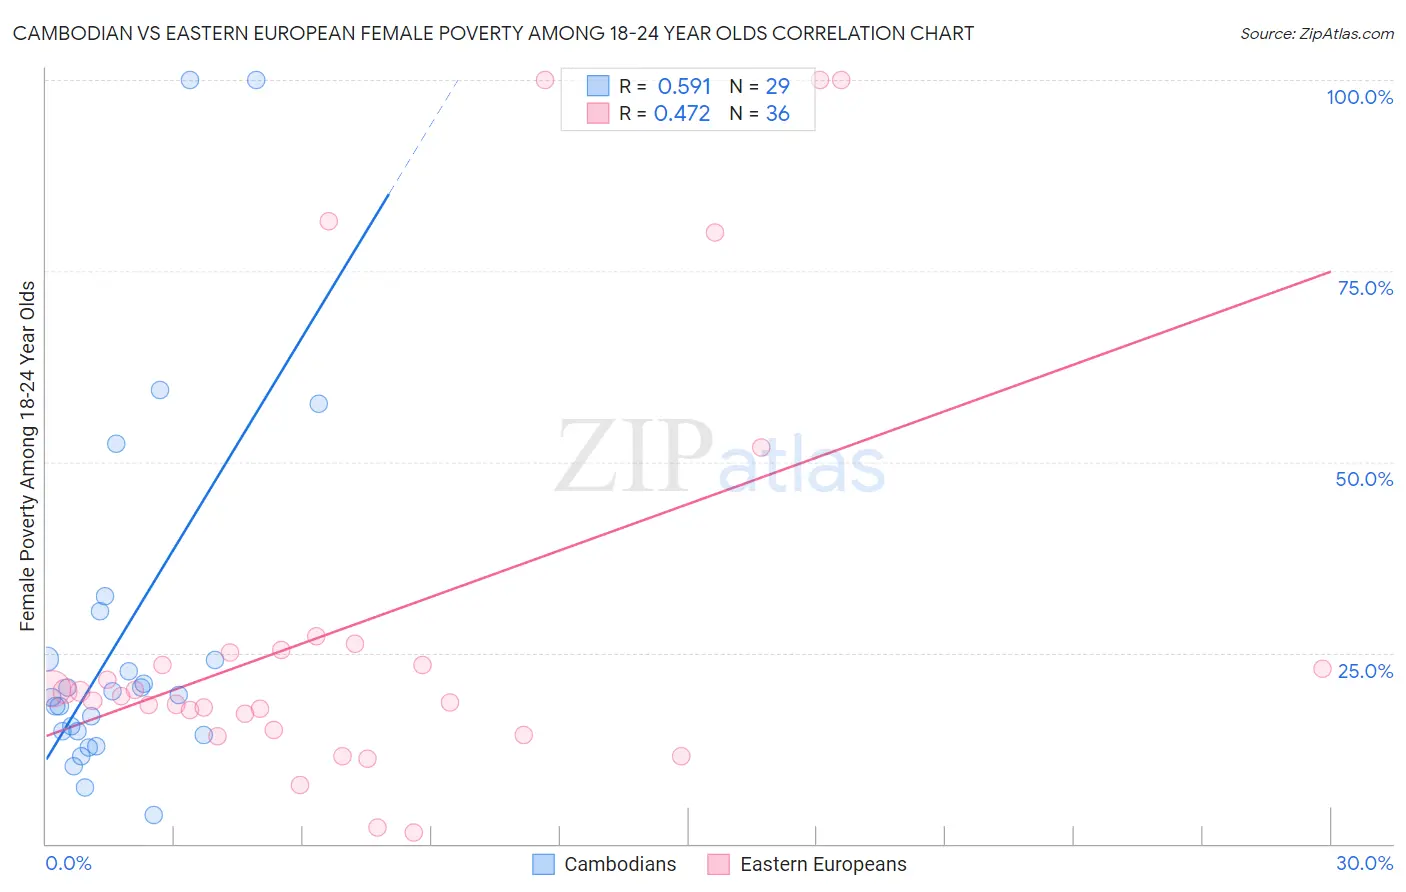 Cambodian vs Eastern European Female Poverty Among 18-24 Year Olds